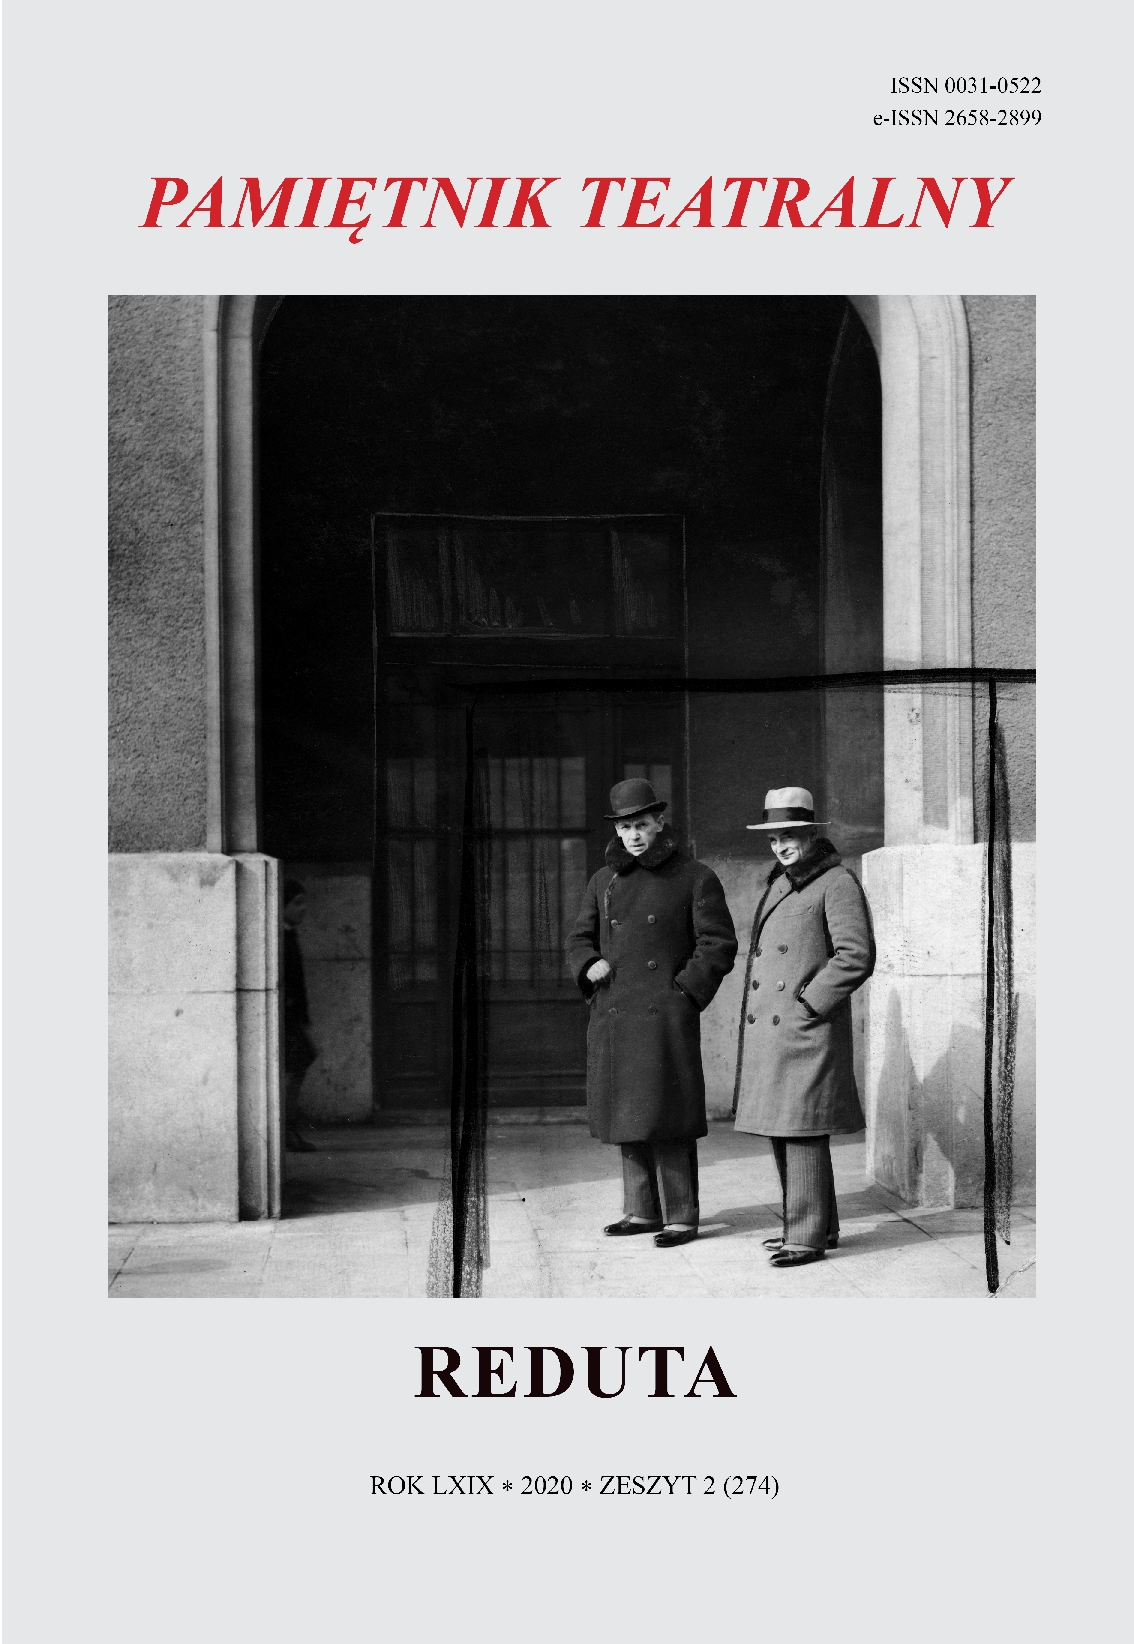 Theatre Company as Myth: Reflections on the Book Czy tylko Reduta? [Only Reduta?] Cover Image